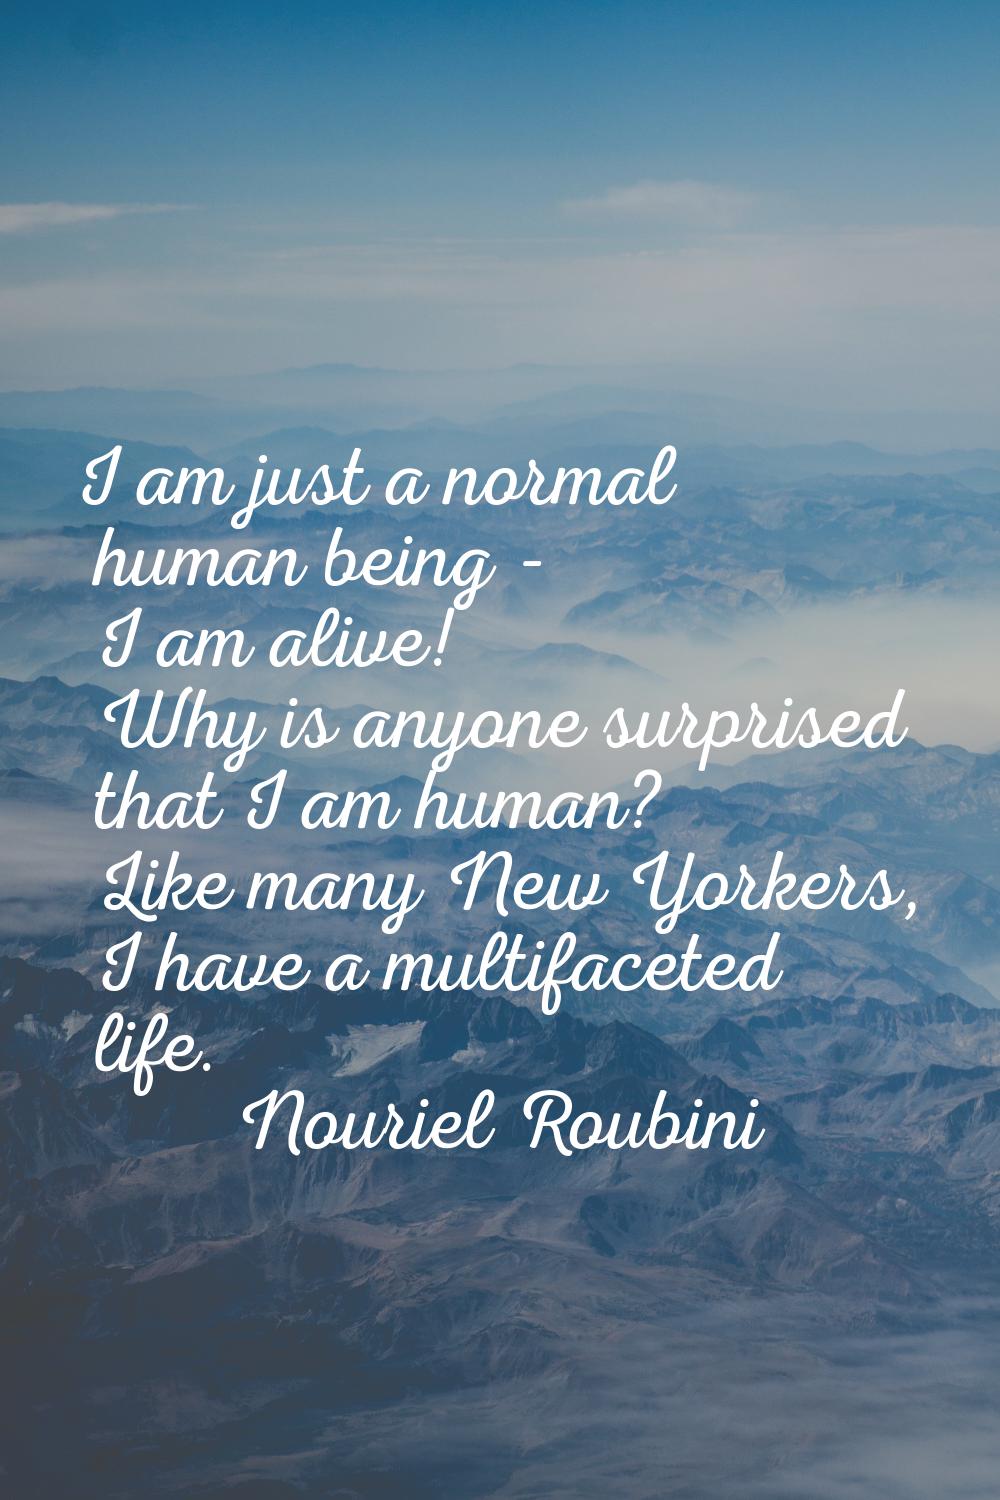 I am just a normal human being - I am alive! Why is anyone surprised that I am human? Like many New